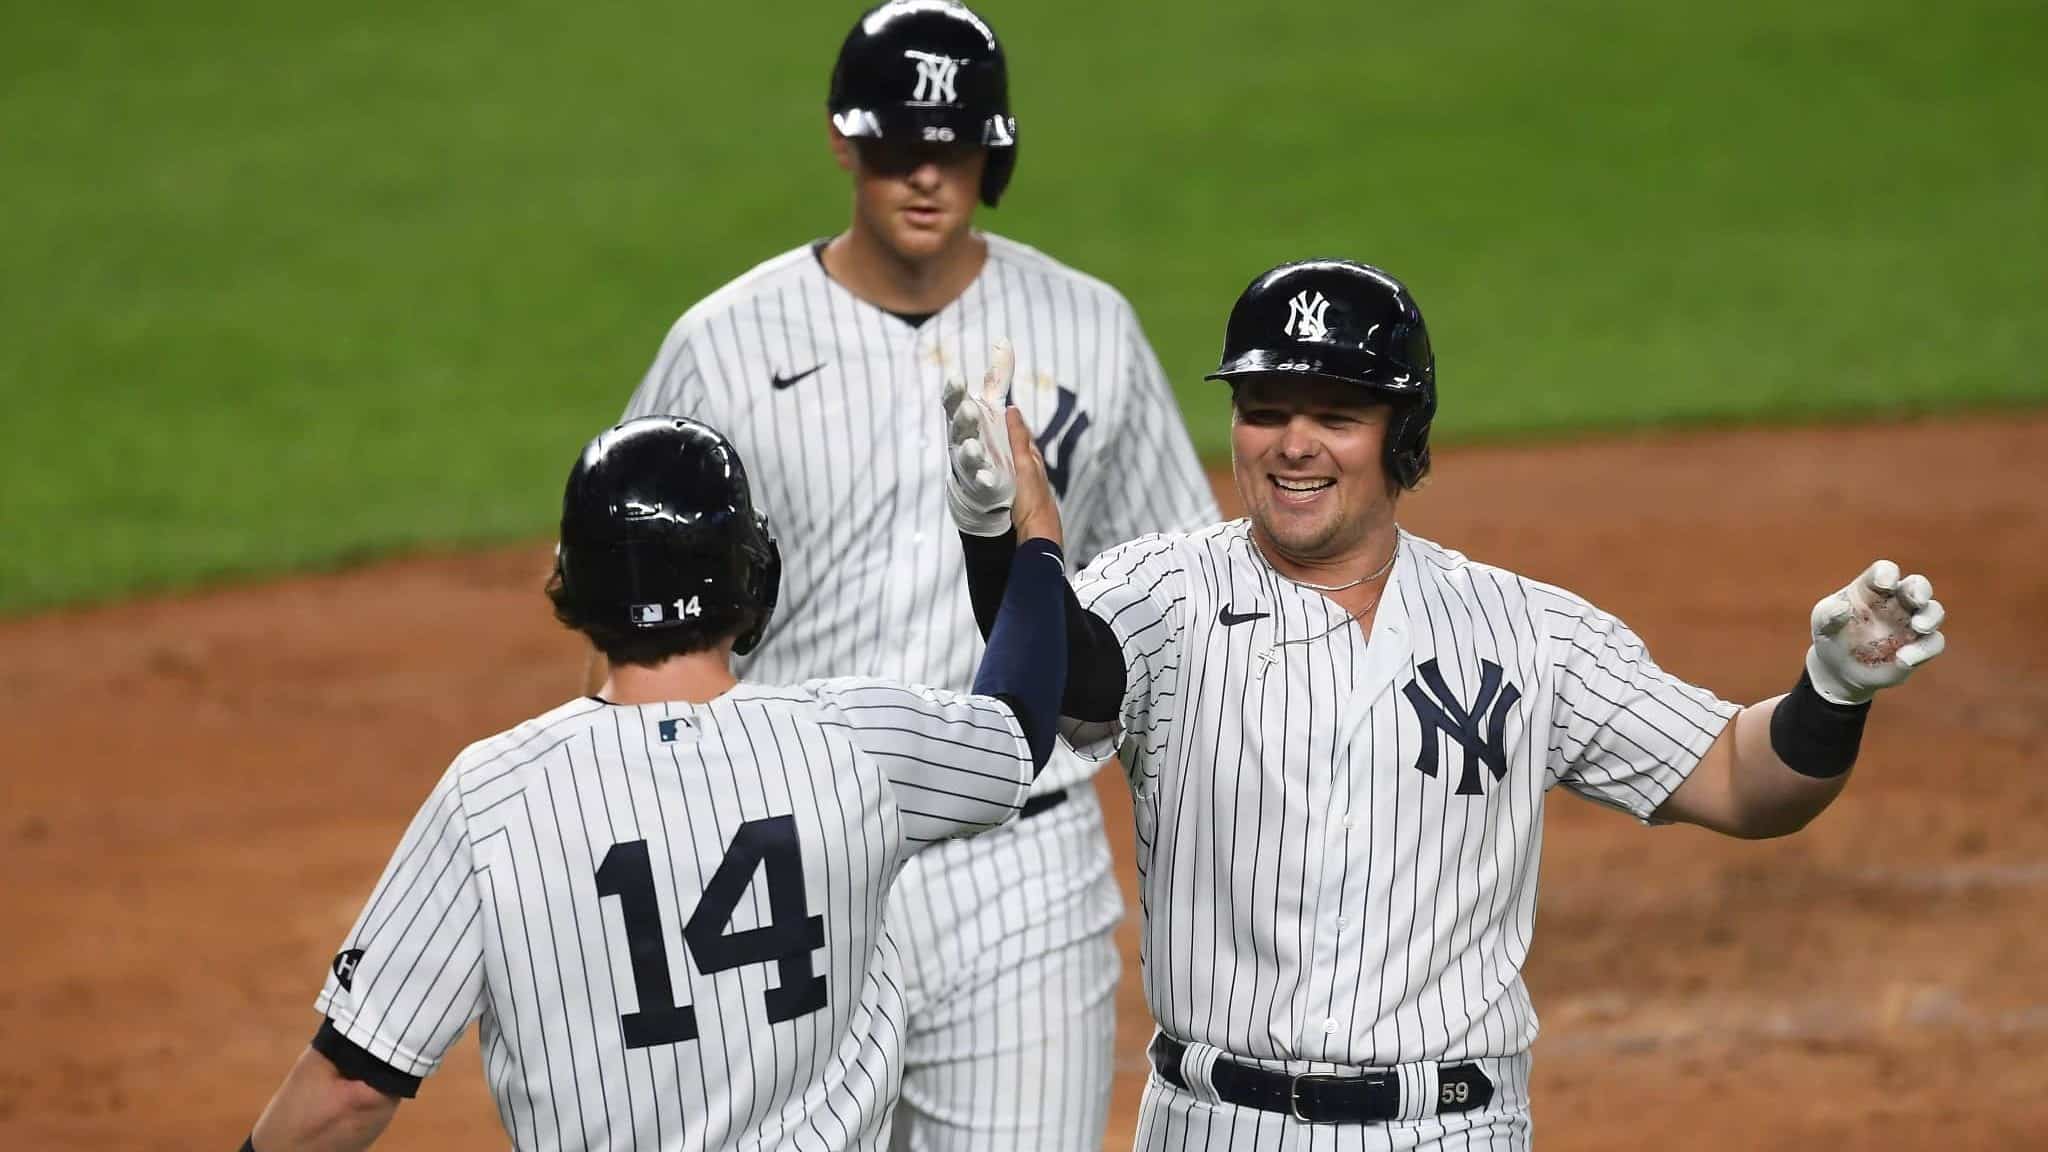 NEW YORK, NEW YORK - SEPTEMBER 15: Luke Voit #59 of the New York Yankees celebrates with Tyler Wade #14 after hitting a three-run home run during the second inning against the Toronto Blue Jays at Yankee Stadium on September 15, 2020 in the Bronx borough of New York City.